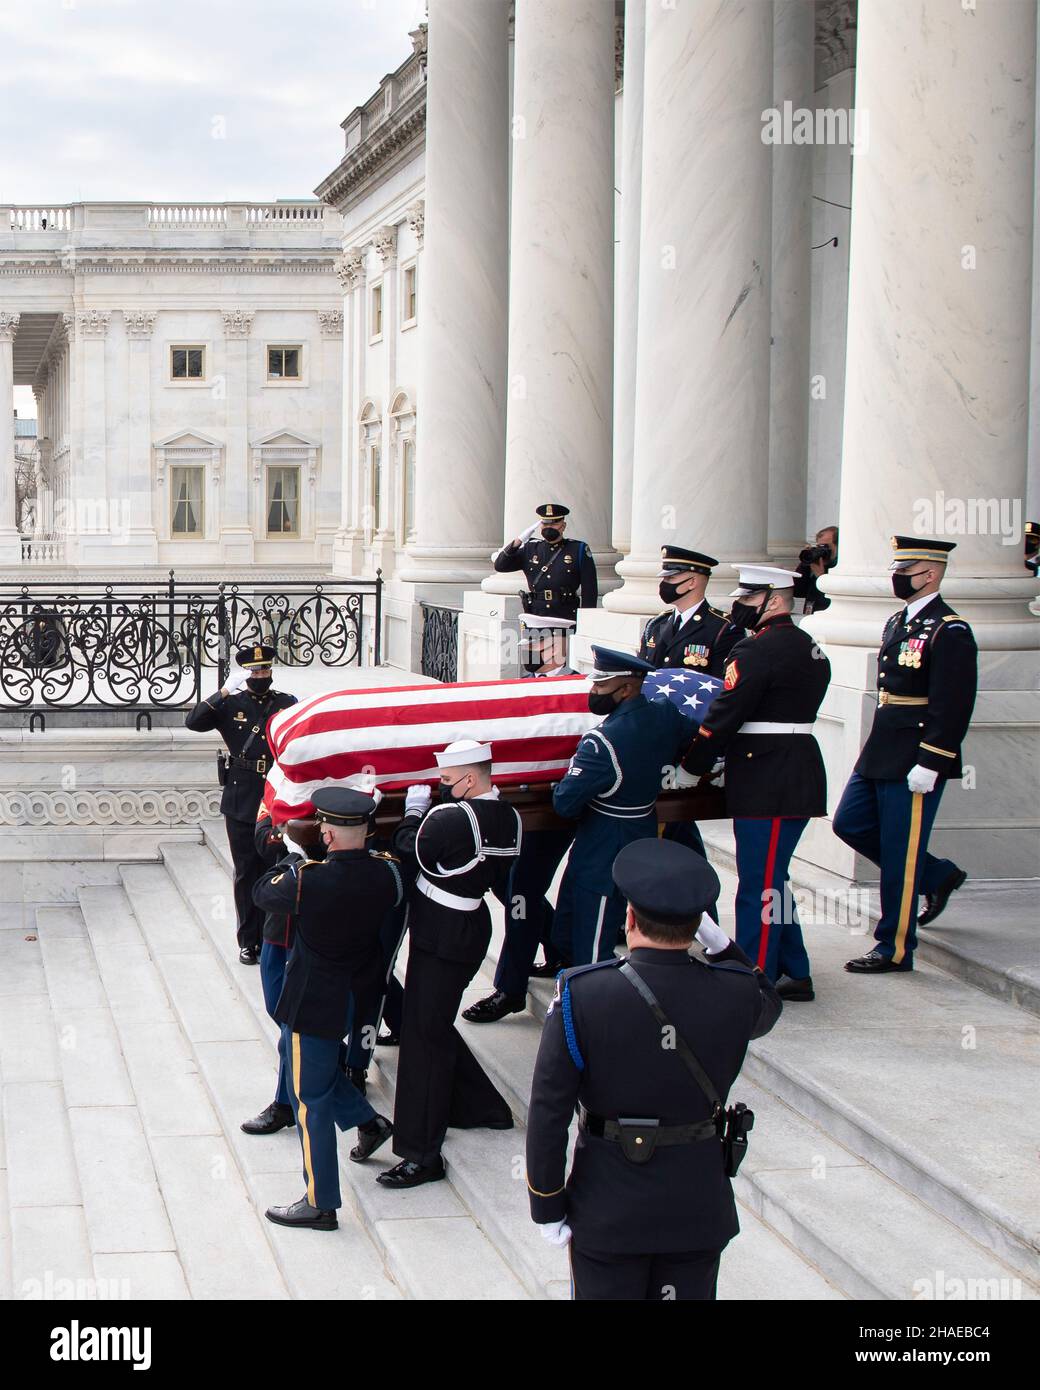 Washington, United States Of America. 10th Dec, 2021. Washington, United States of America. 10 December, 2021. U.S. Armed Forces honor guard carry the flag-draped casket of World War II veteran and former Senator Robert Dole down the steps of the U.S. Capitol, December 10, 2021 in Washington, DC Senator Dole died at age 98 following a lifetime of service to the nation. Credit: Sgt. Kevin Roy/U.S. Army/Alamy Live News Stock Photo